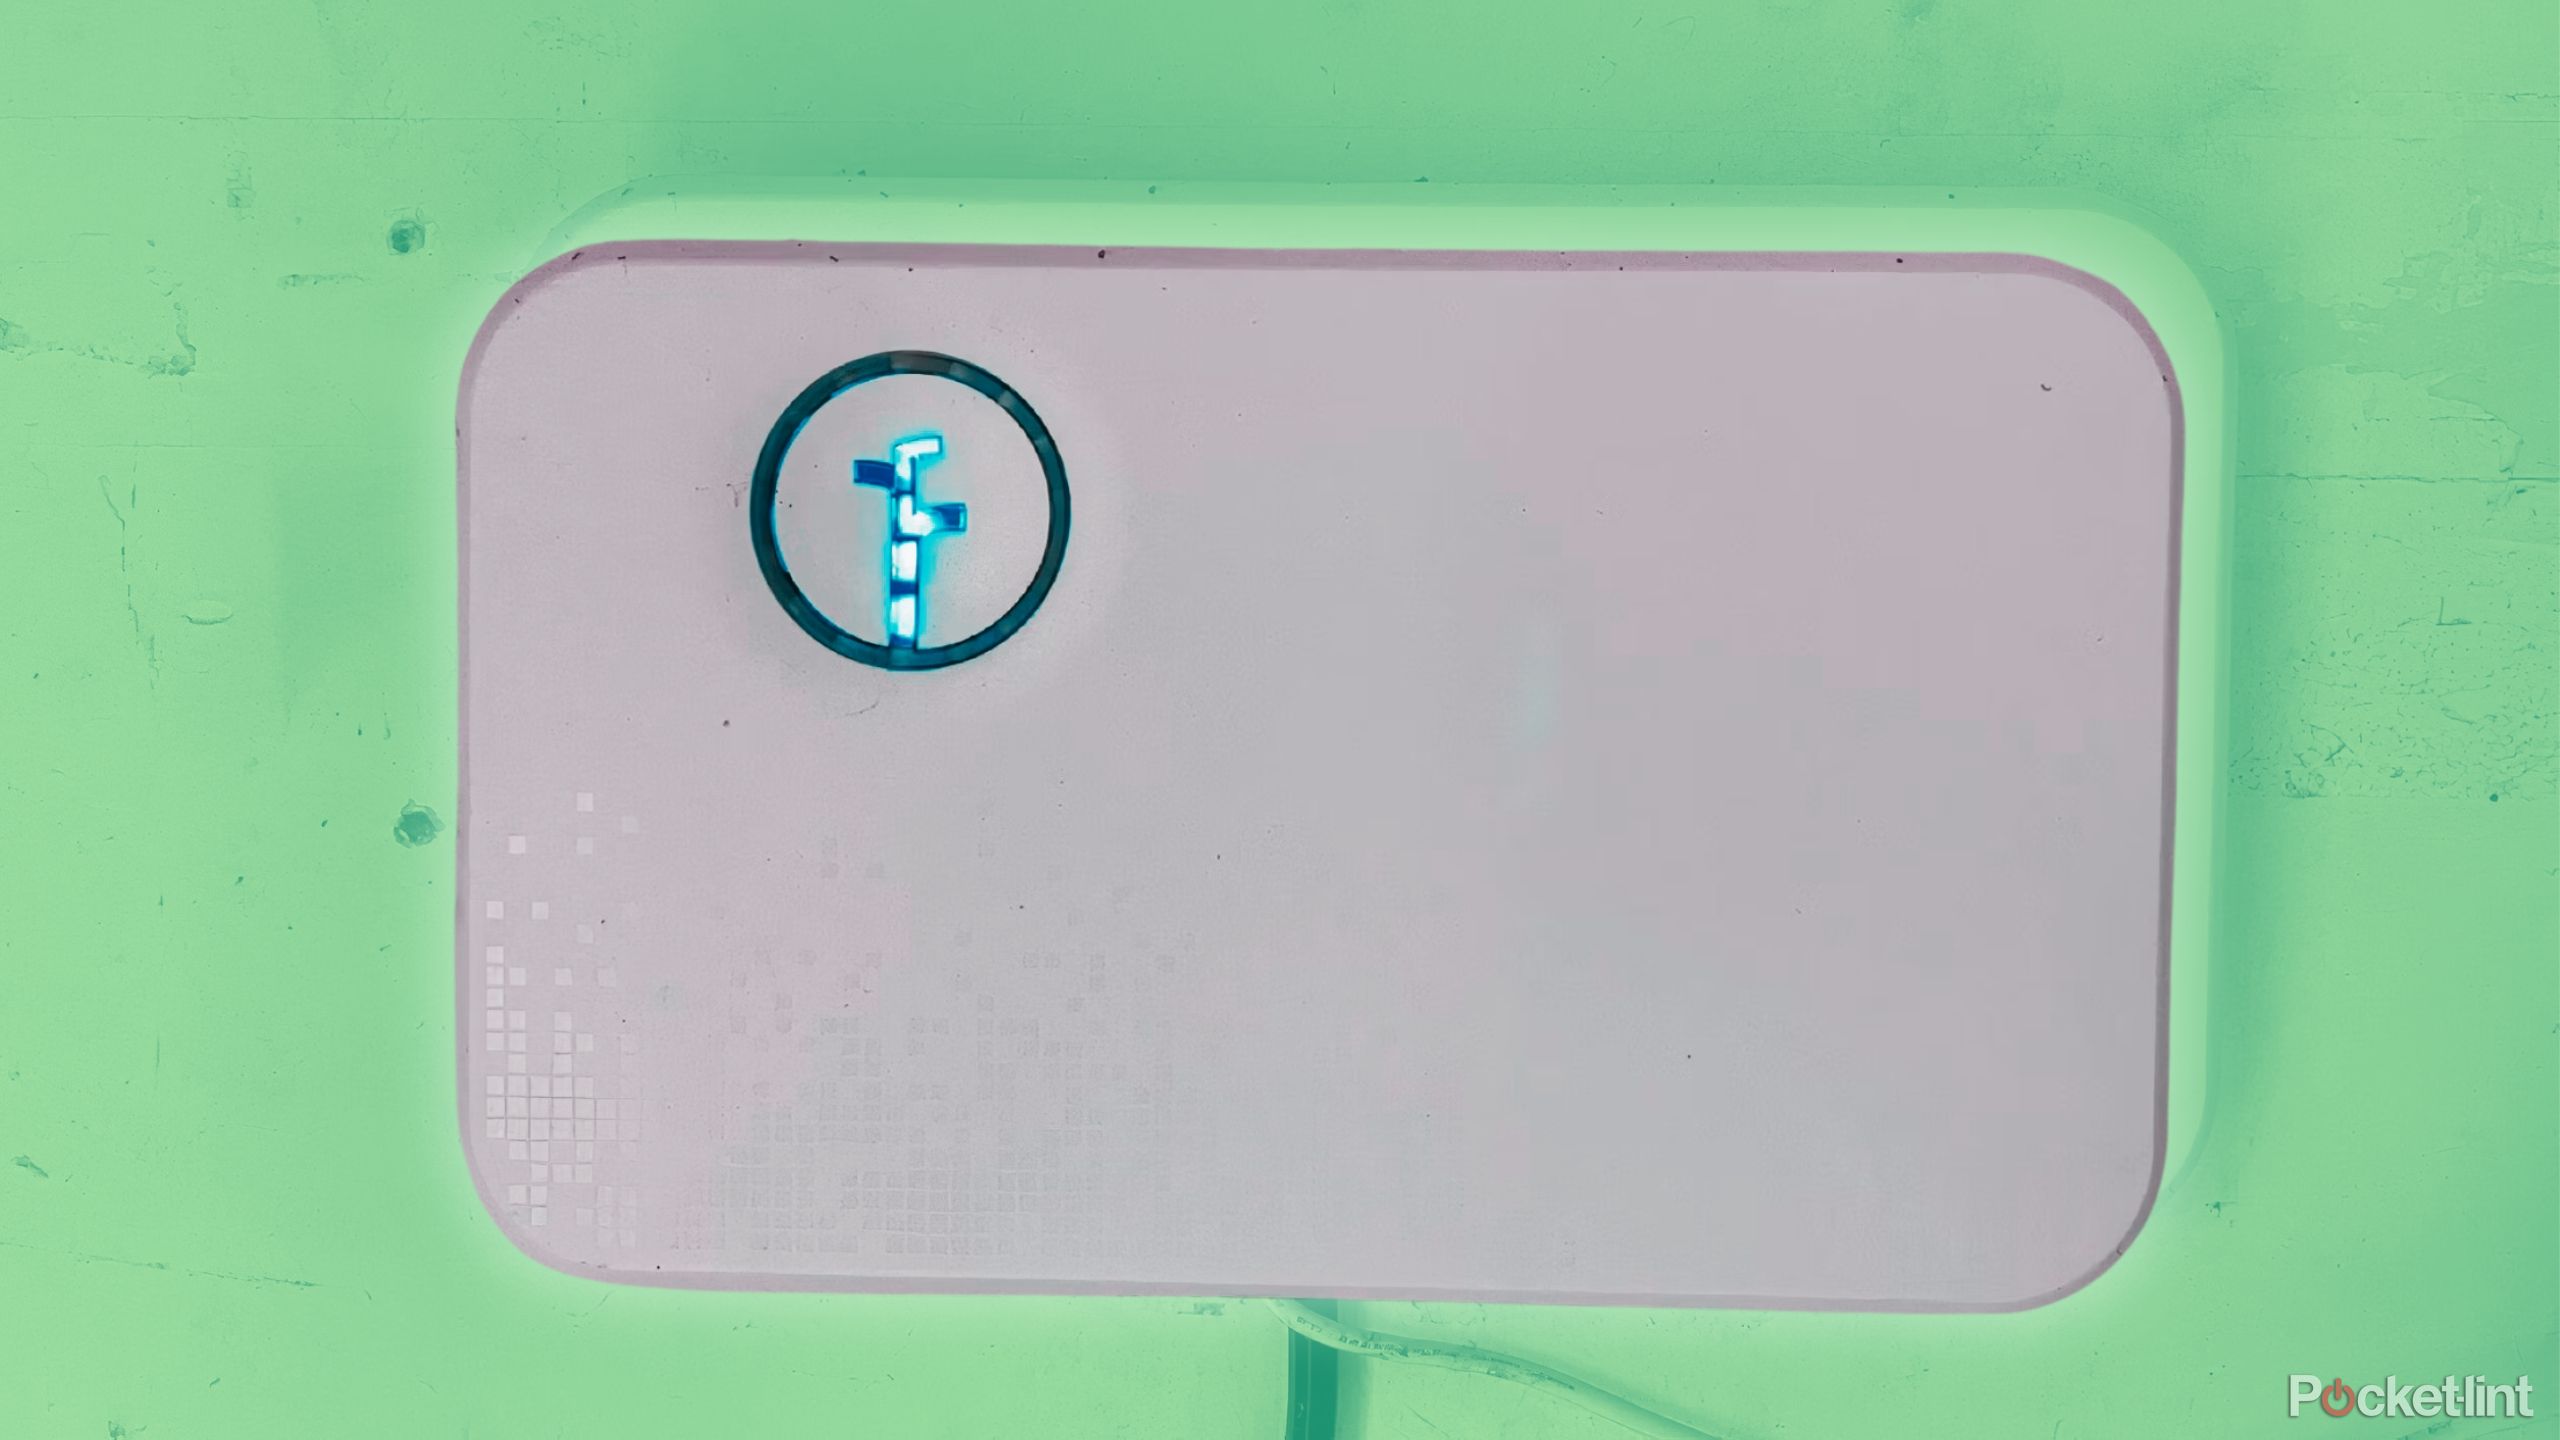 The Rachio Smart Sprinkler Controller Generation 2 on a green wall